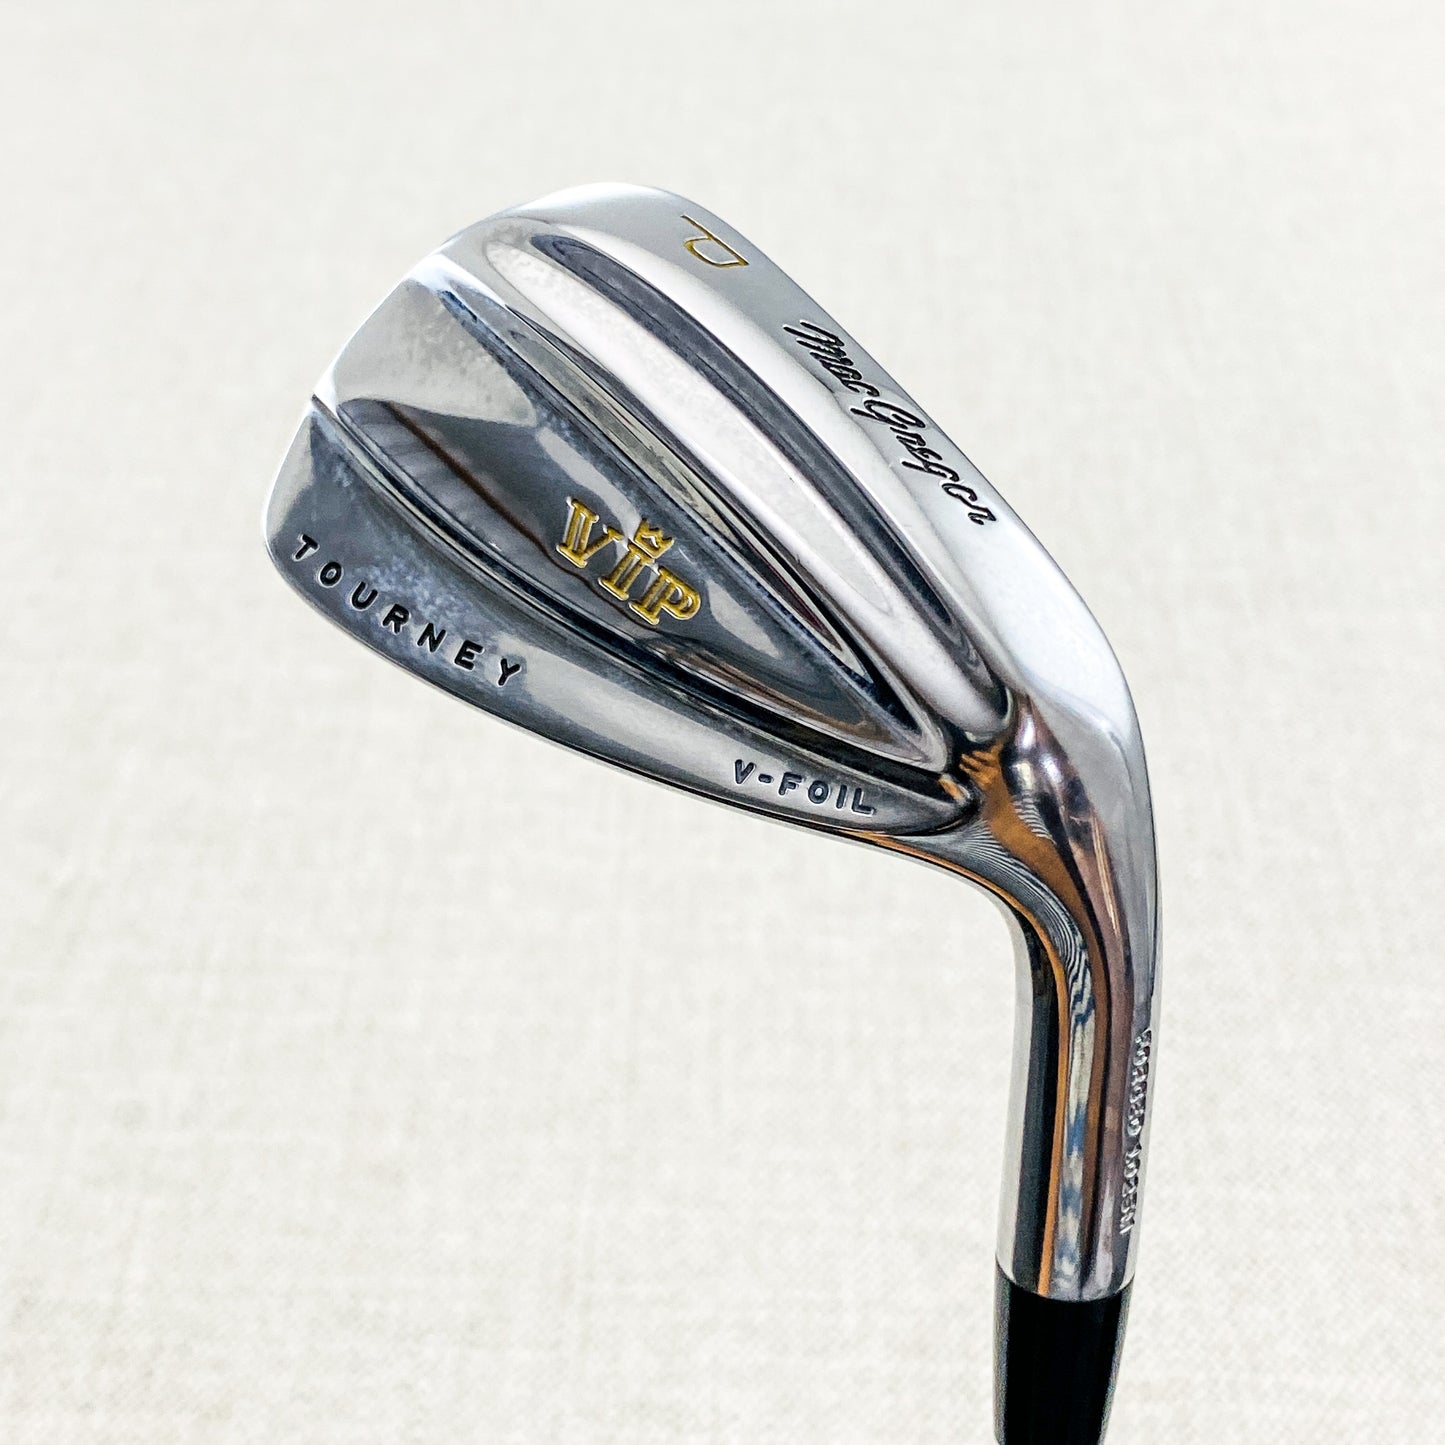 MacGregor VIP V-Foil Single Iron. Sold Separately! S300 Stiff - Excellent Condition # 11152